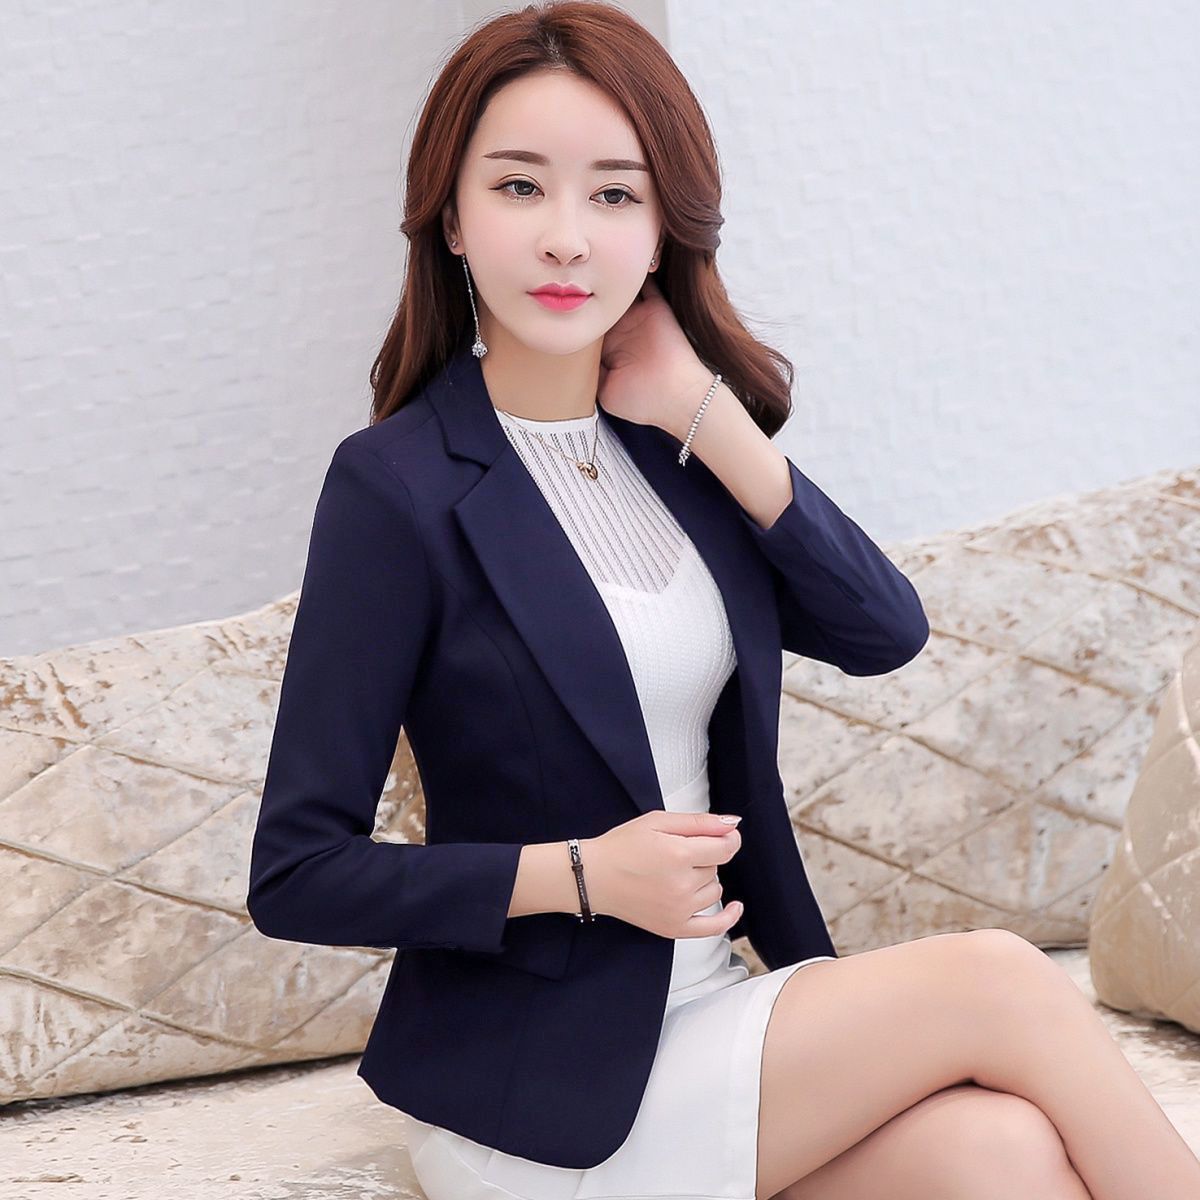 Small suit jacket women's 2020 spring, autumn and summer new short black slimming professional small suit women's long-sleeved all-match